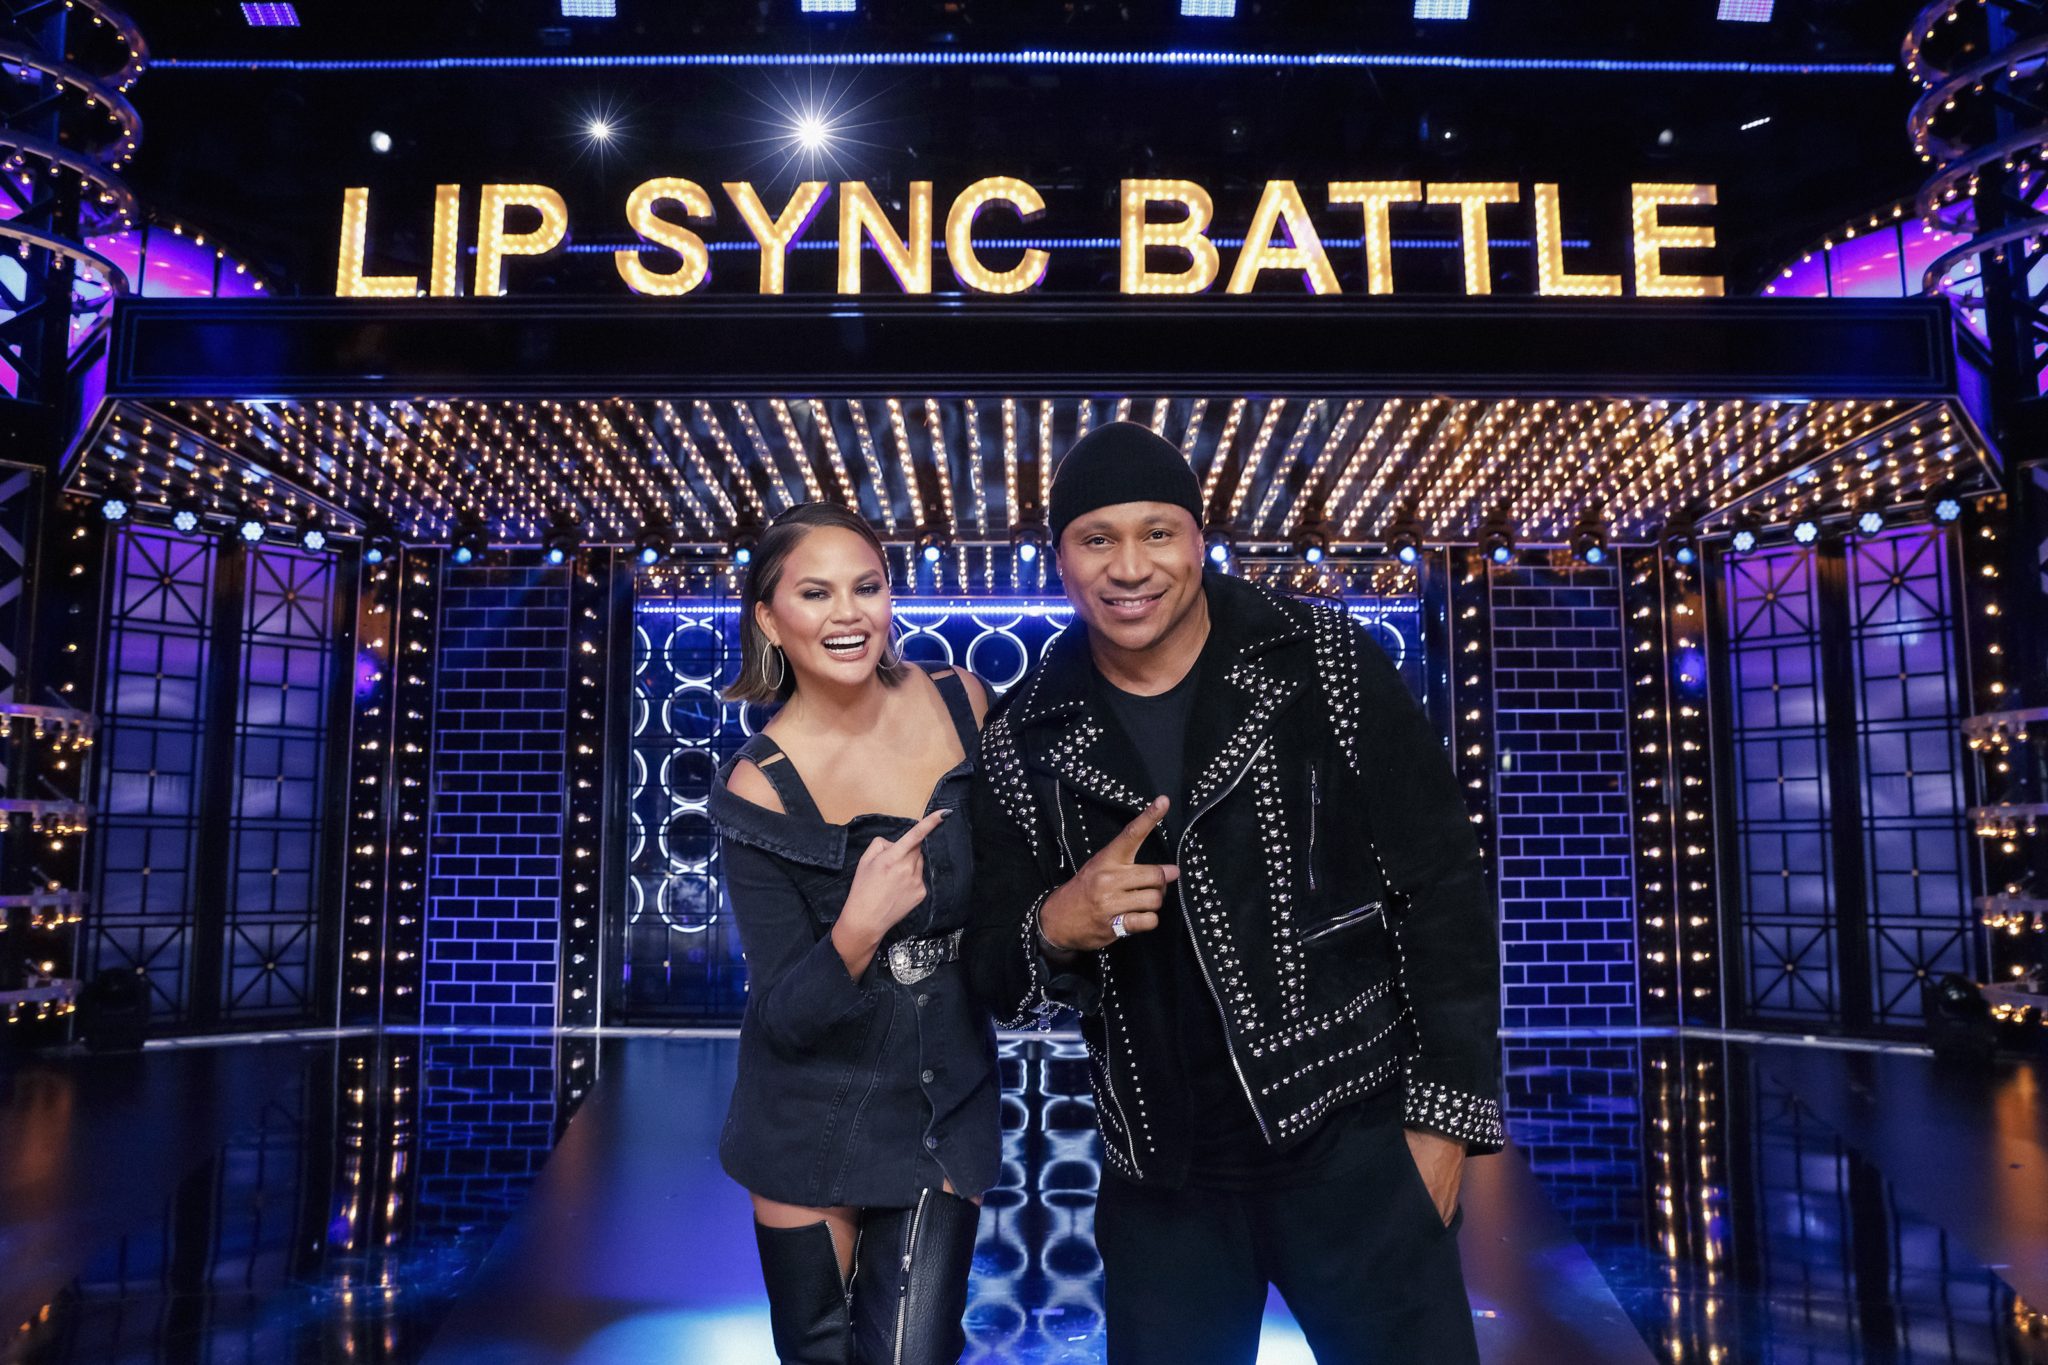 ‘Lip Sync Battle’ Returns May 30 at 10pm ET/PT on Paramount Network